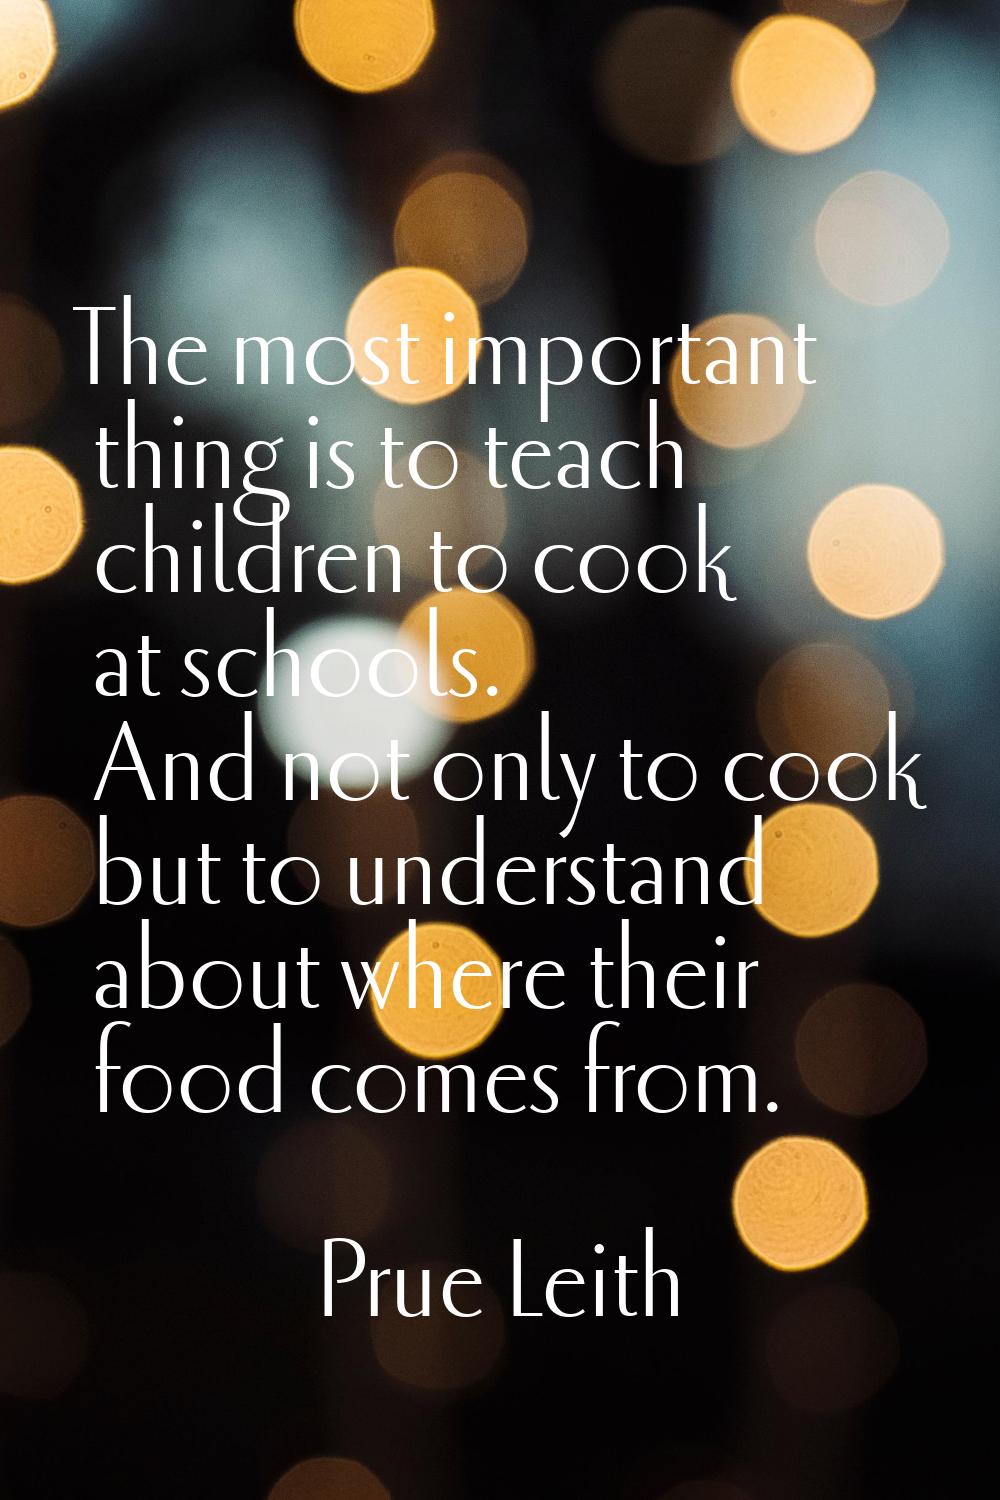 The most important thing is to teach children to cook at schools. And not only to cook but to under